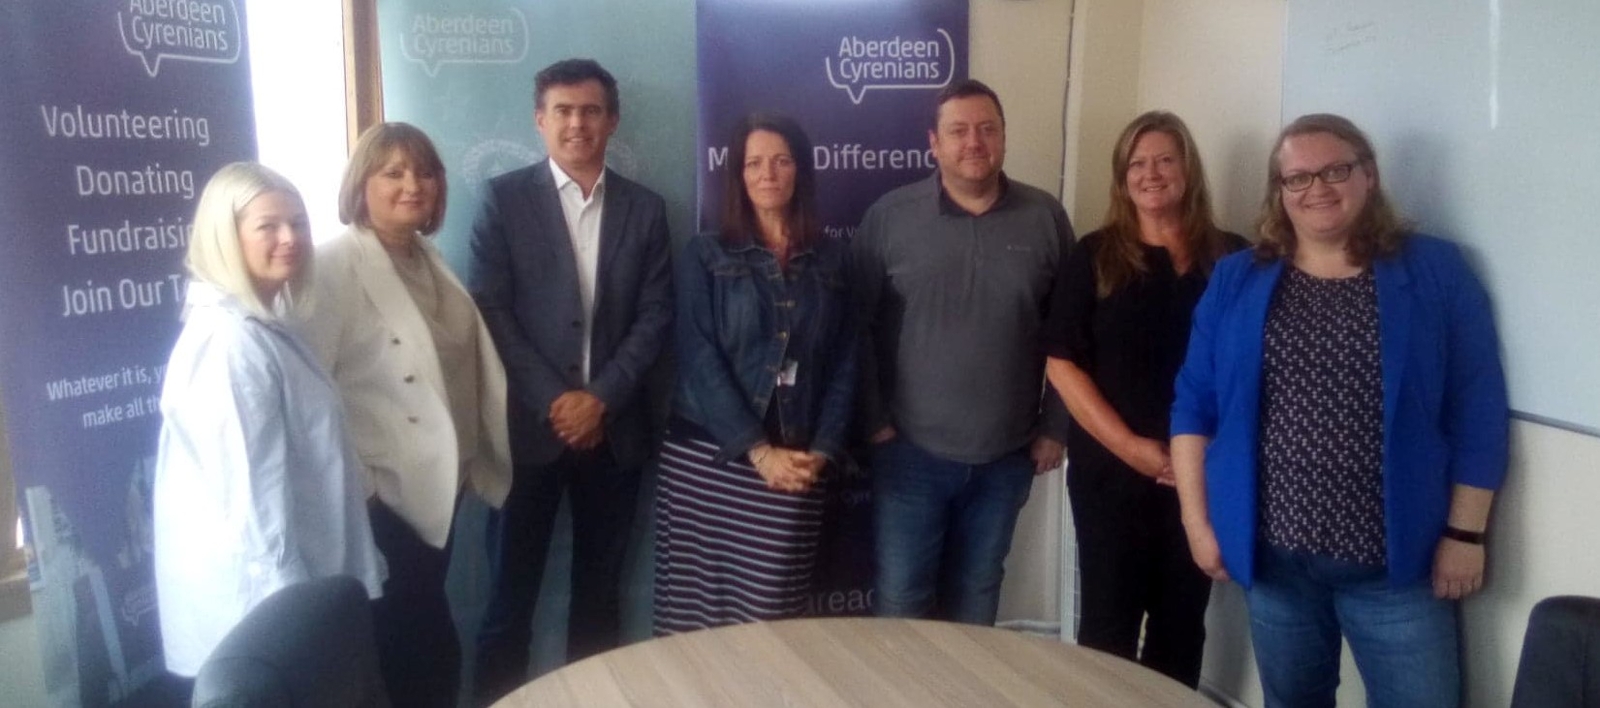 Aberdeen Cyrenians and Deloitte announce new partnership for social impact and successful futures